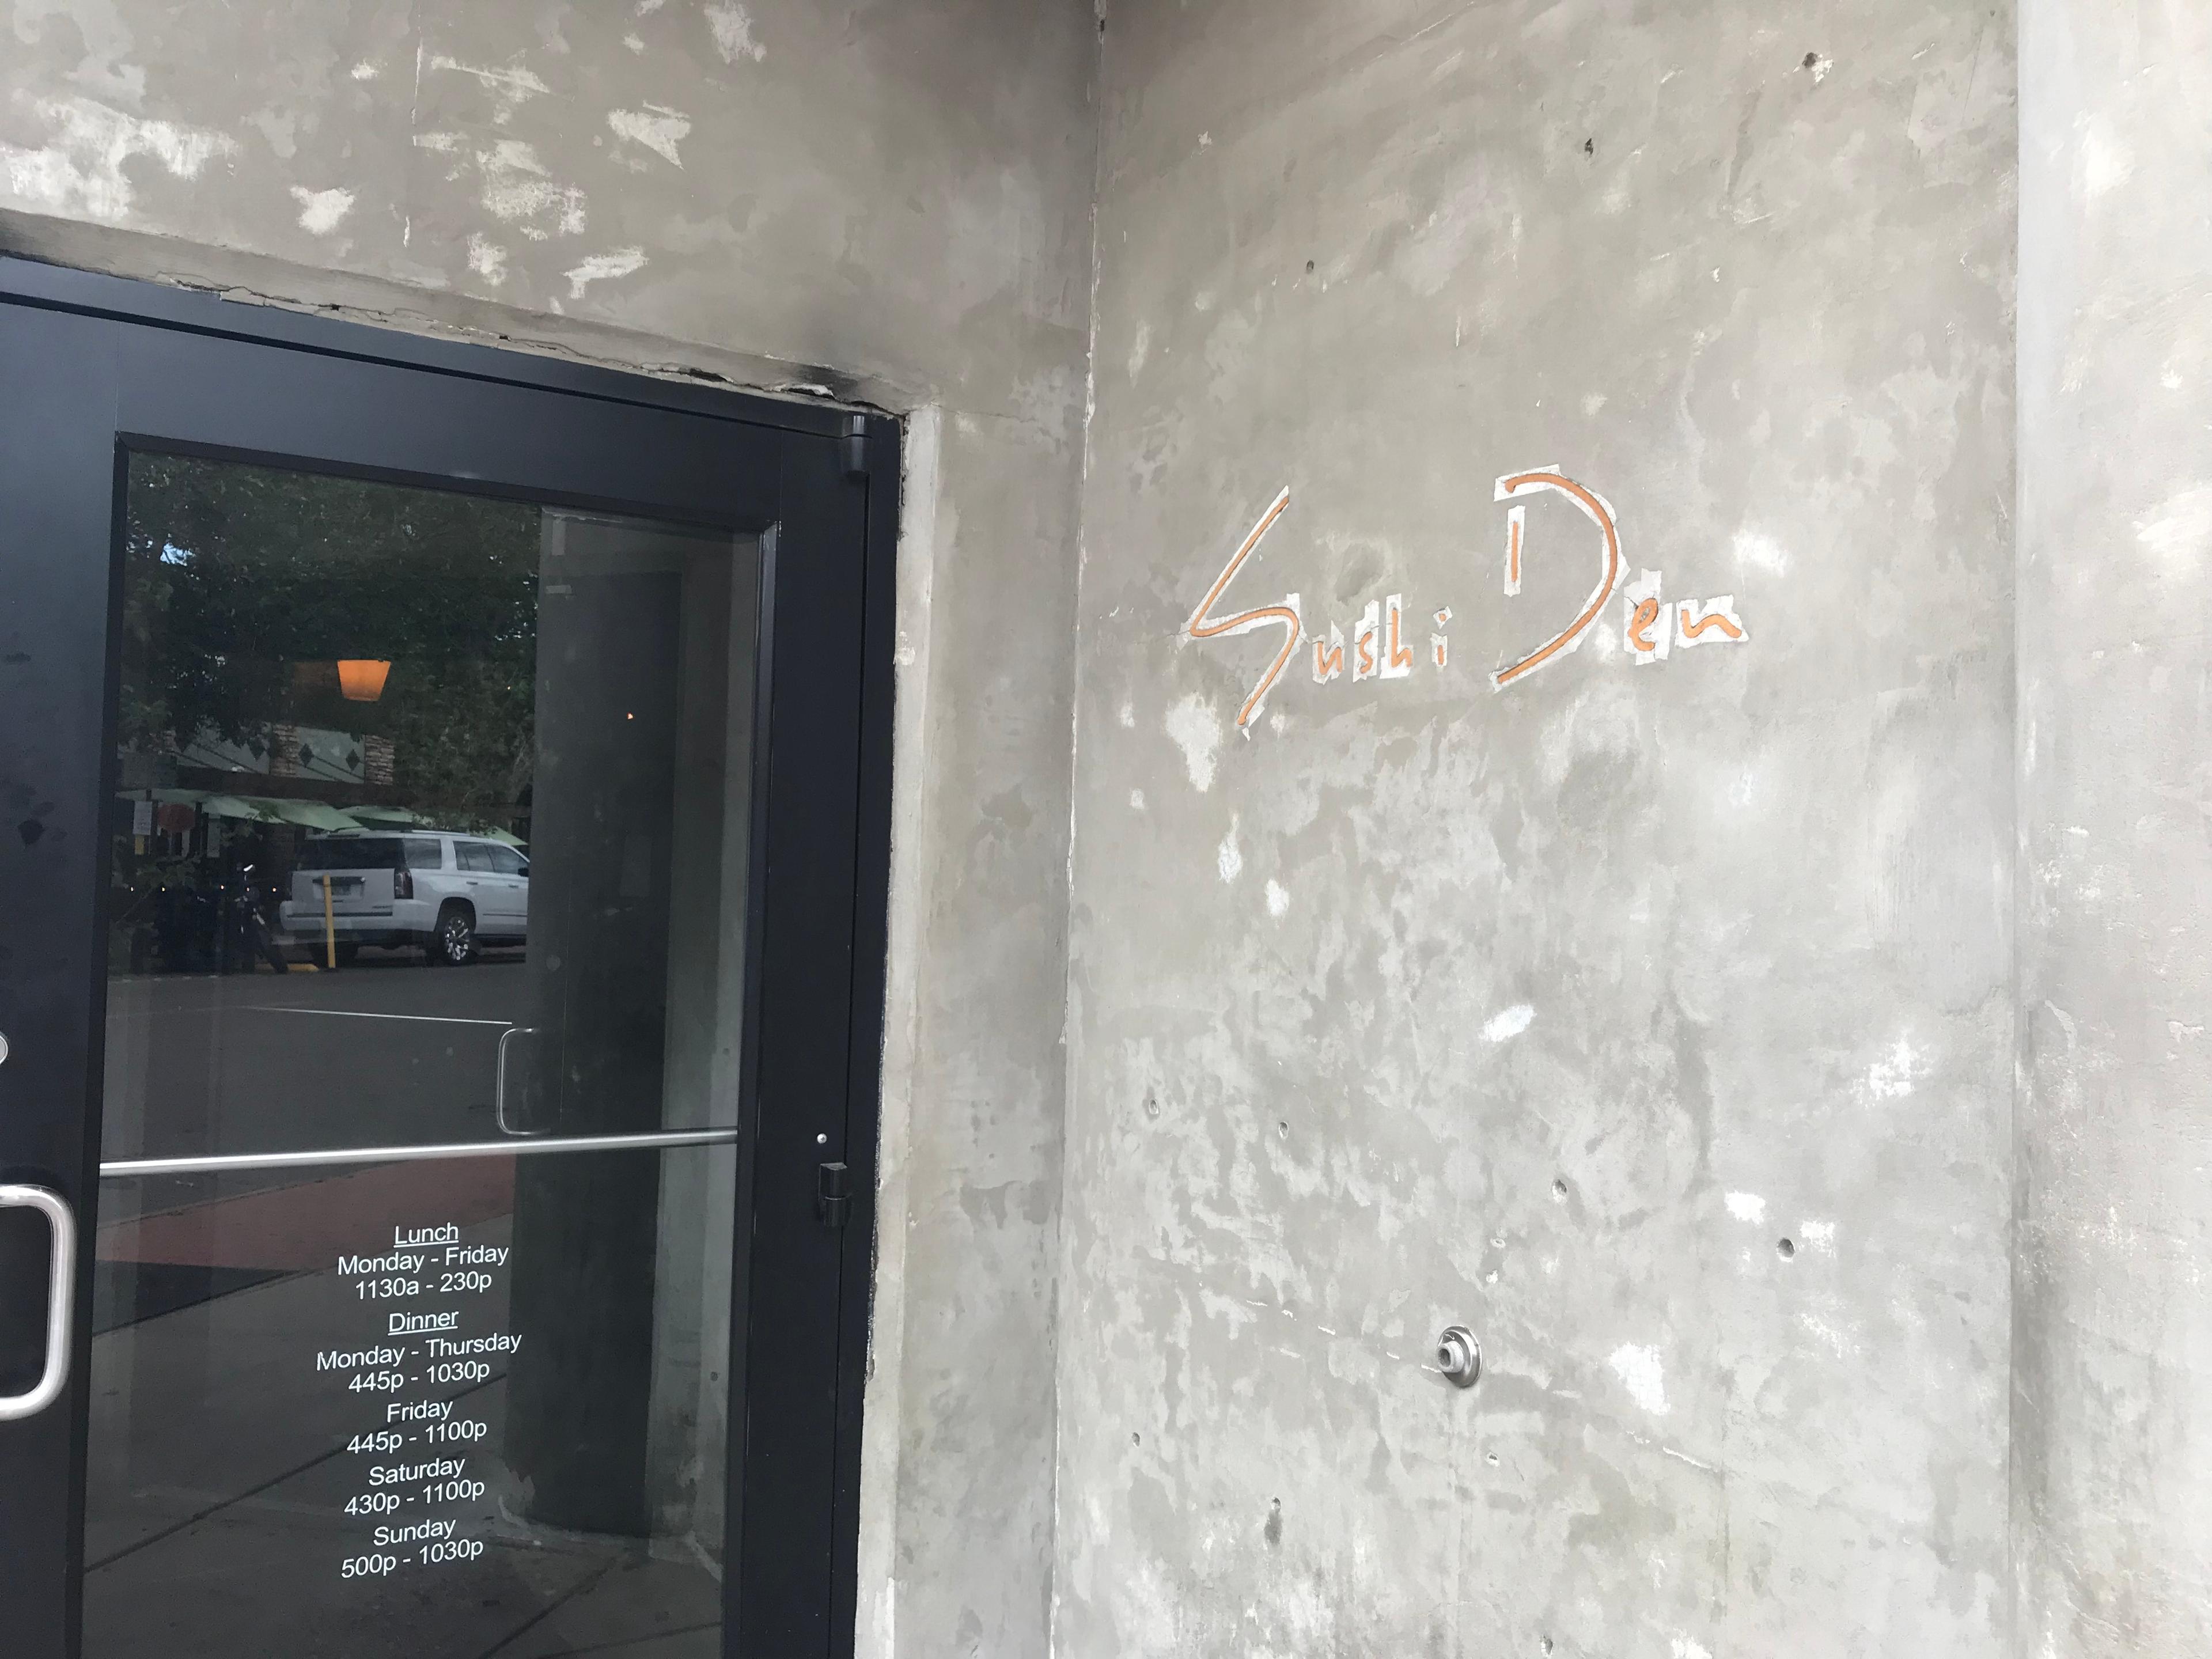 Cover image of this place Sushi Den